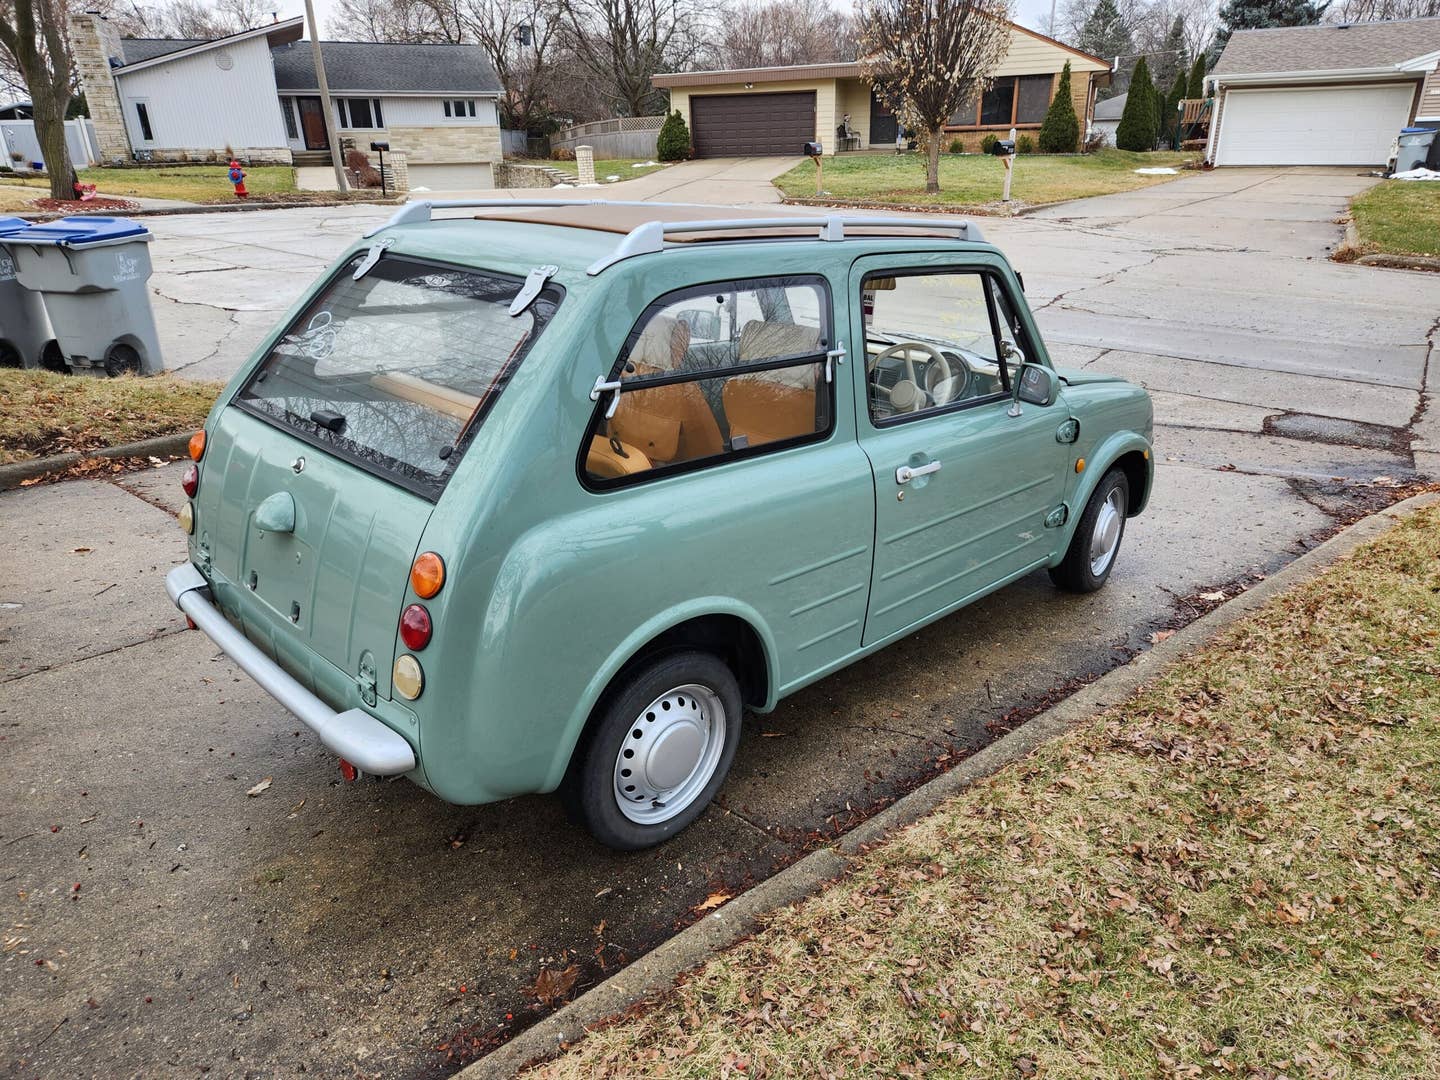 The replacement Nissan Pao, which arrived without a hitch.